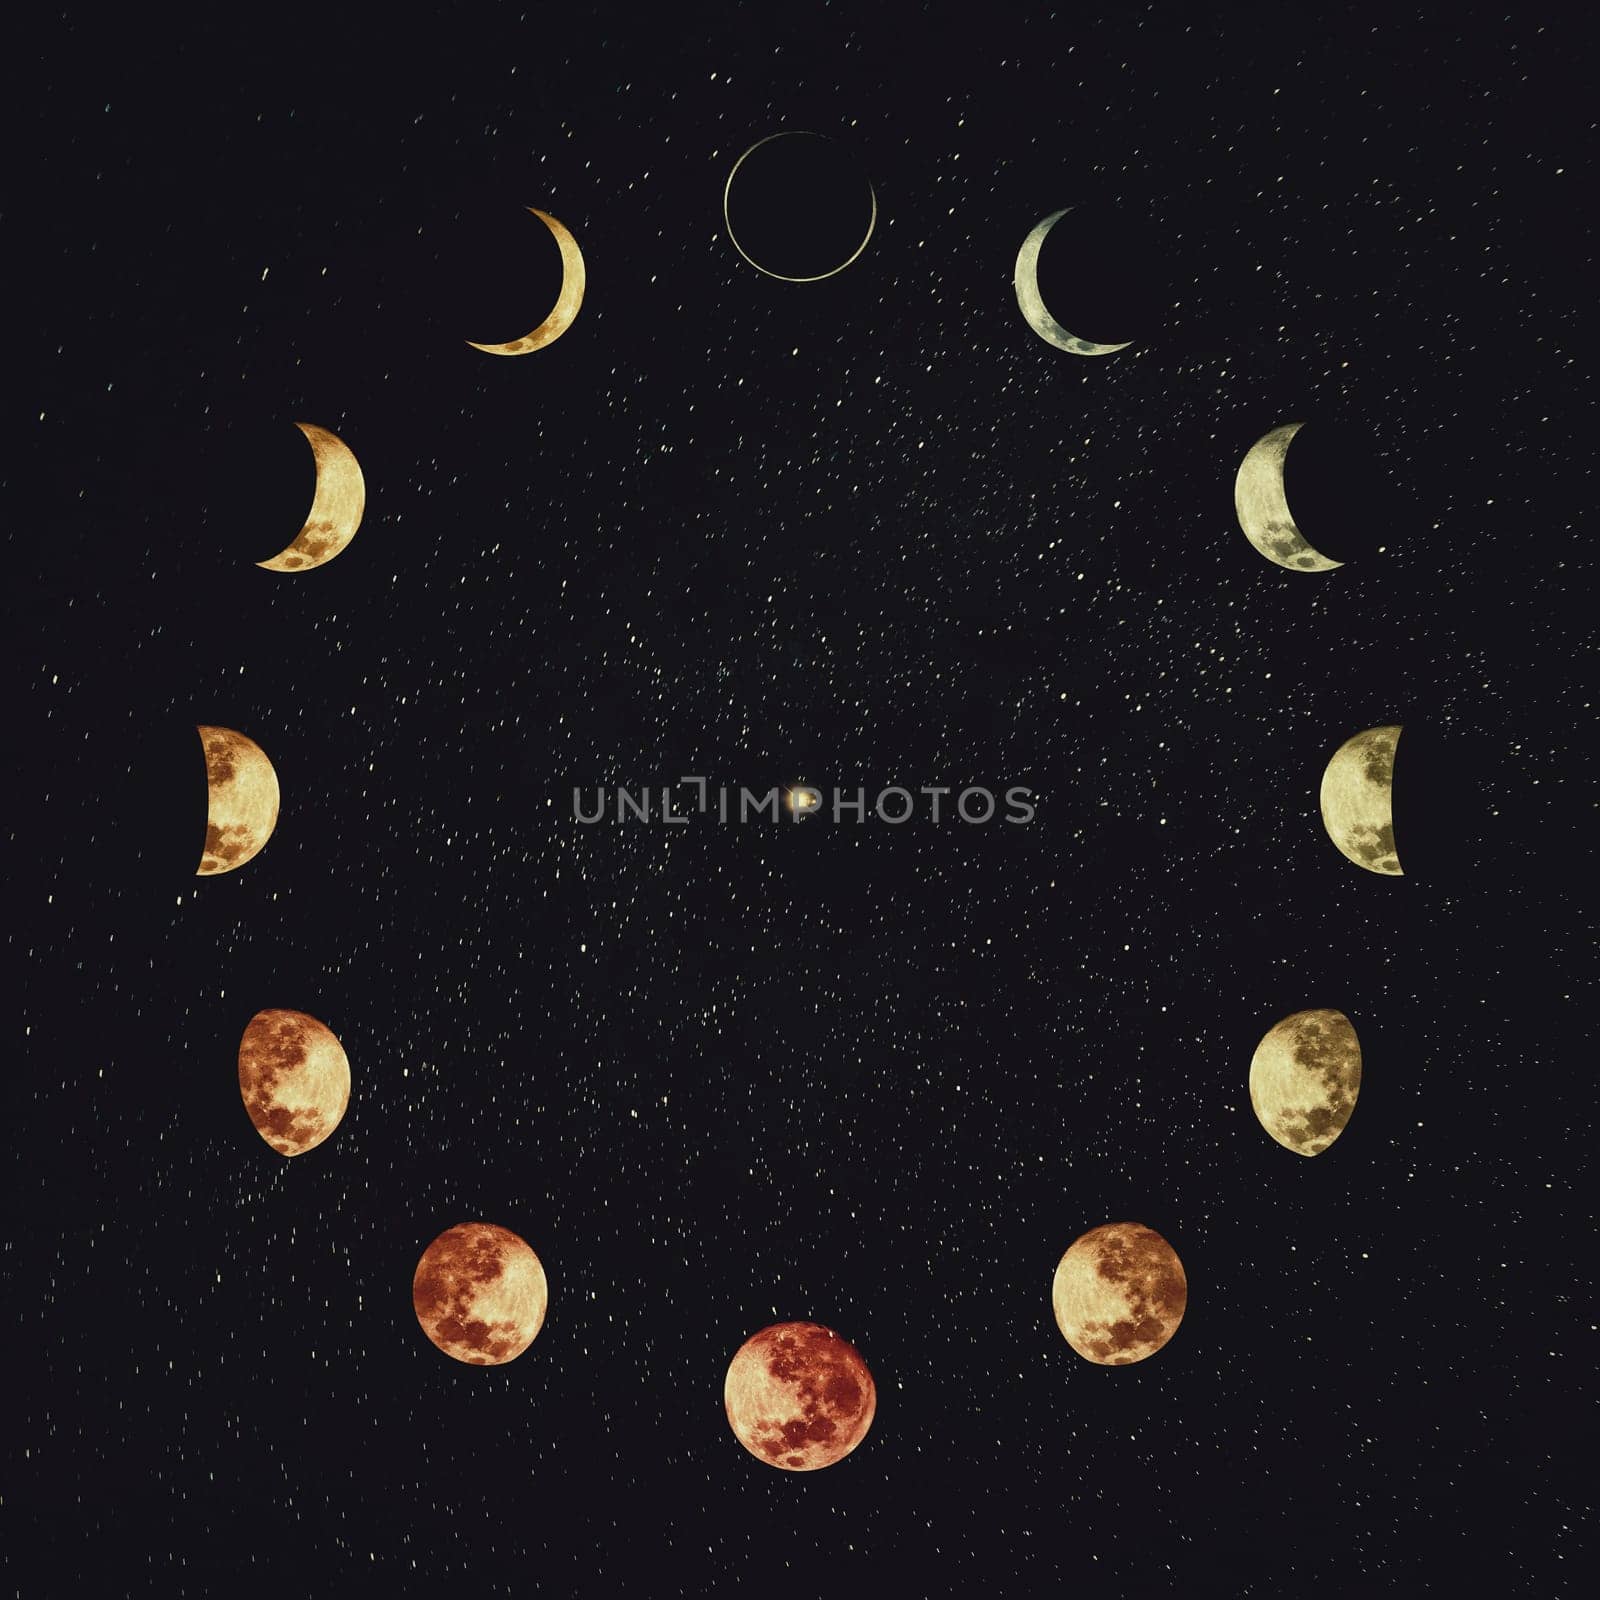 Moon phases over starry night sky background. Astronomy and astrology conceptual scene. Esoteric magic celestial signs, lunar annual calendar, symbol for 12 months, or minimalist clock shape orbit